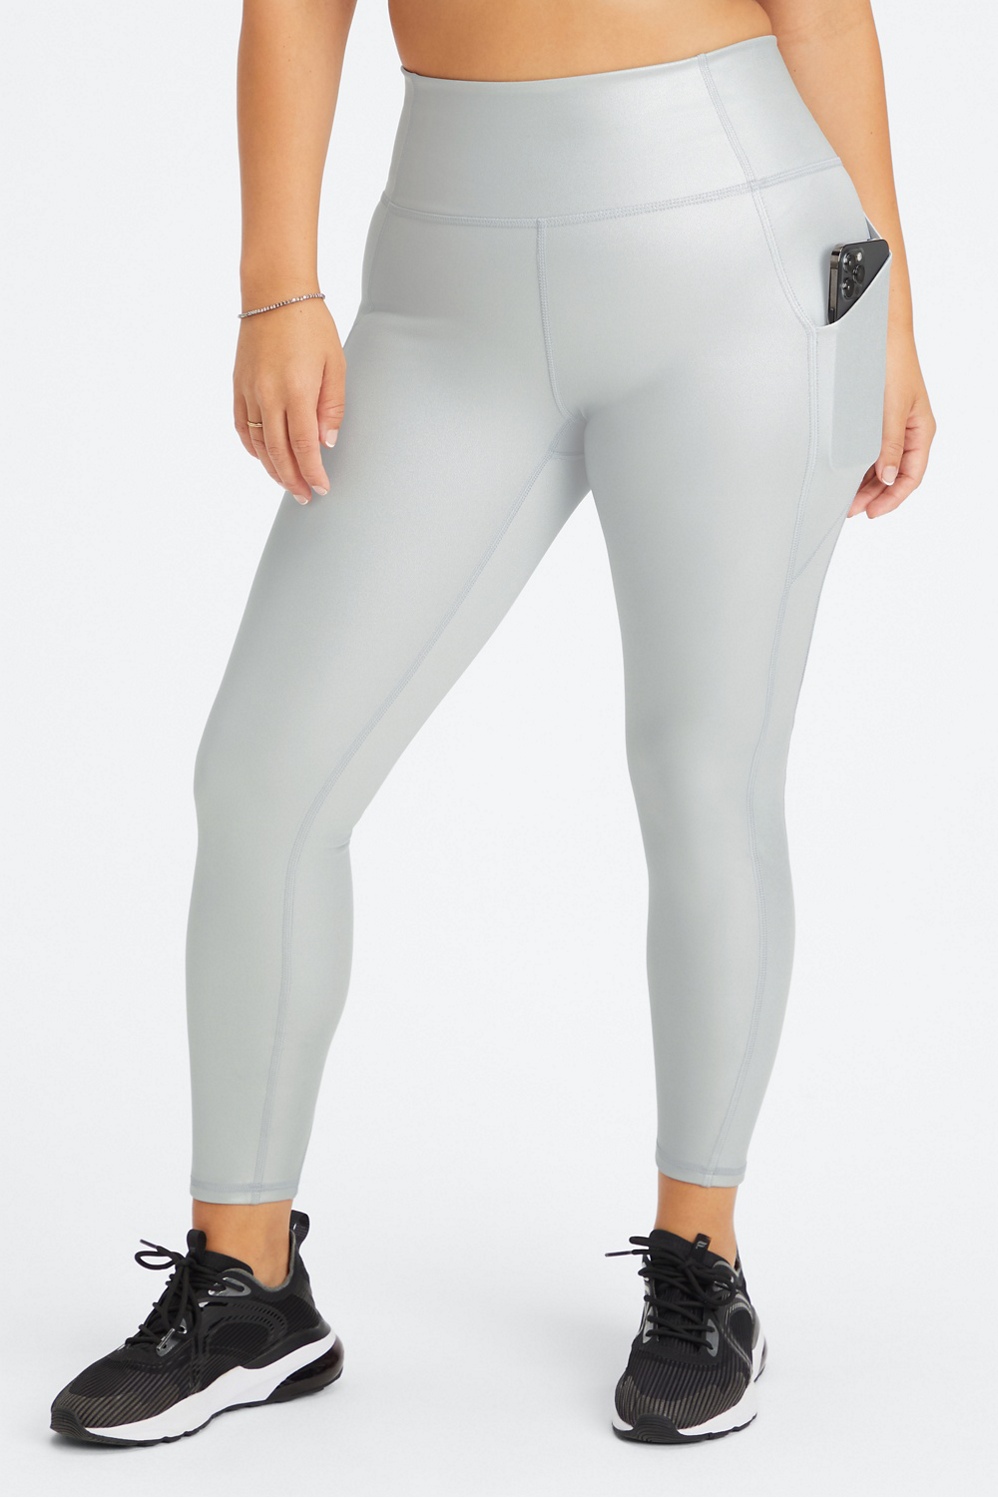 Oasis PureLuxe High-Waisted Leggings Fabletics